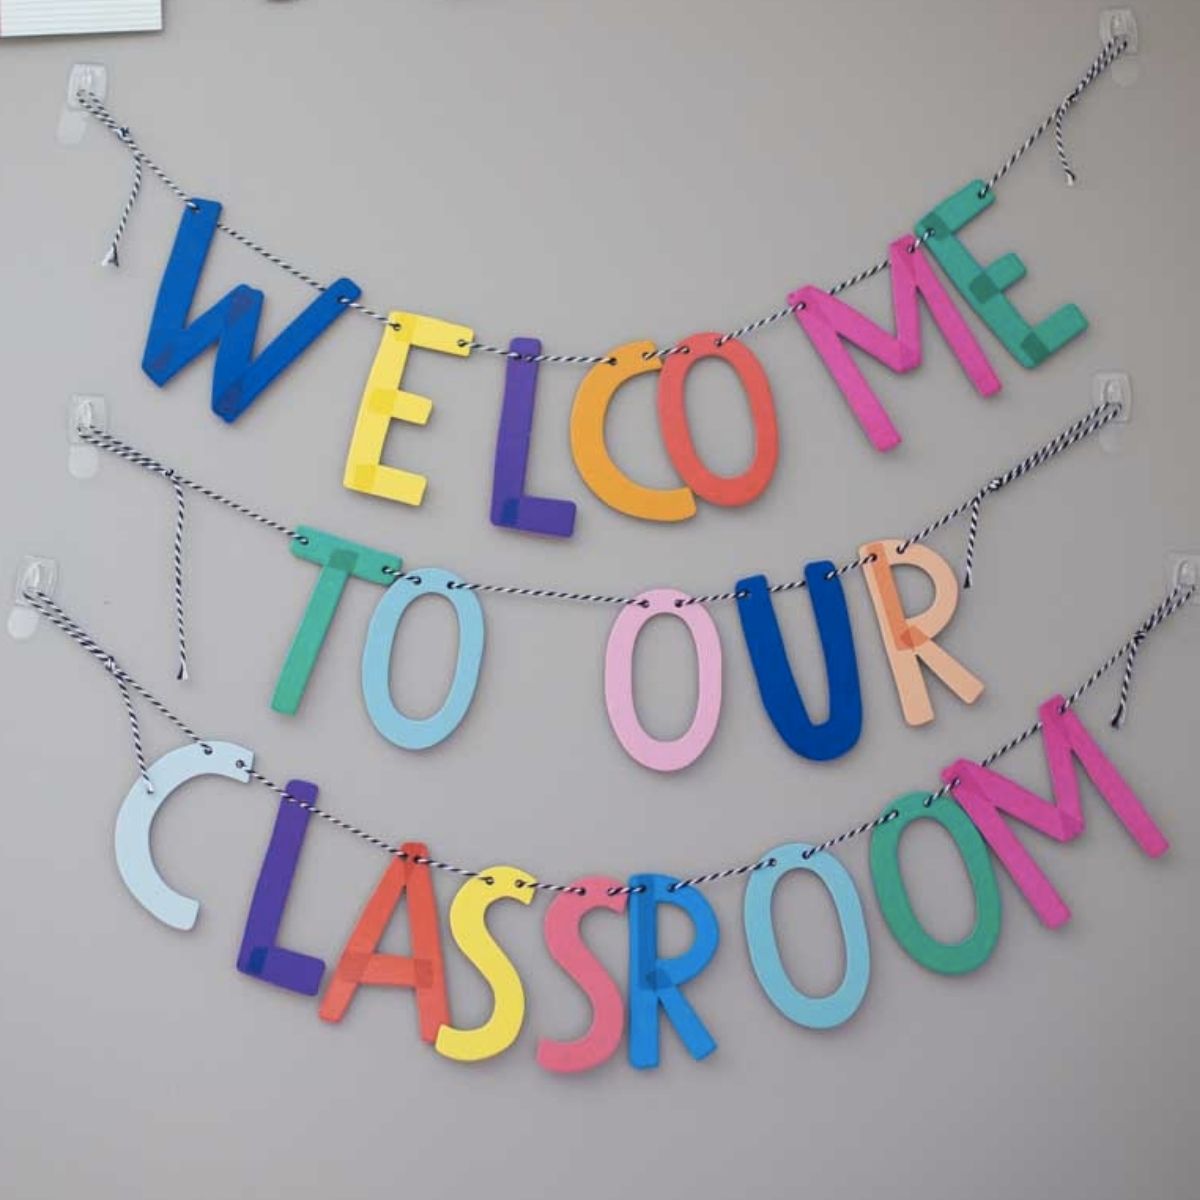 Welcome to our Classroom sign is hanging on the wall.